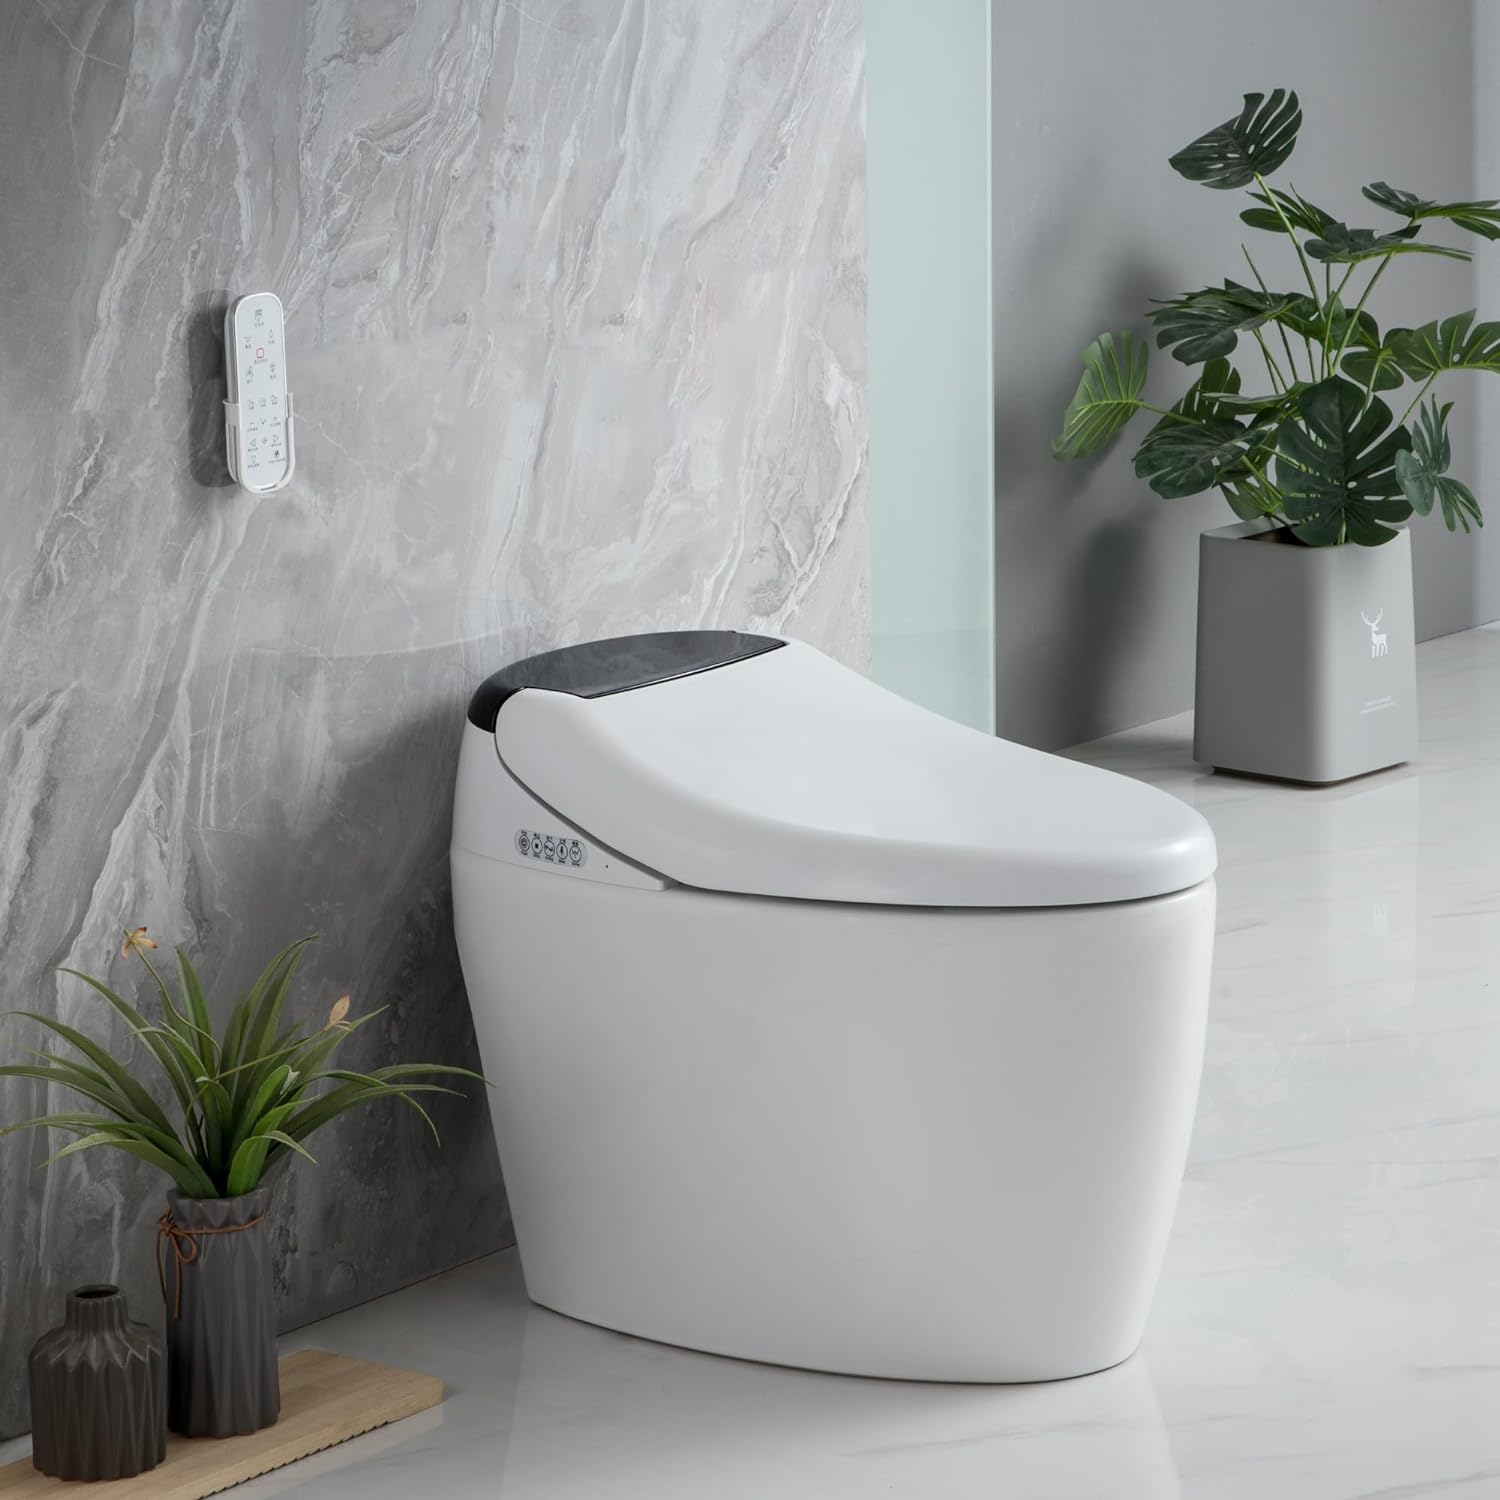 Bidet Toilet with Remote Control, Smart Bidet Toilet Seat with AUTO Open&Close and Remote Control, Smart Toilet with 𝐊𝐢𝐝 Wash,Lady Care Wash,Nozzle Self-cleaning